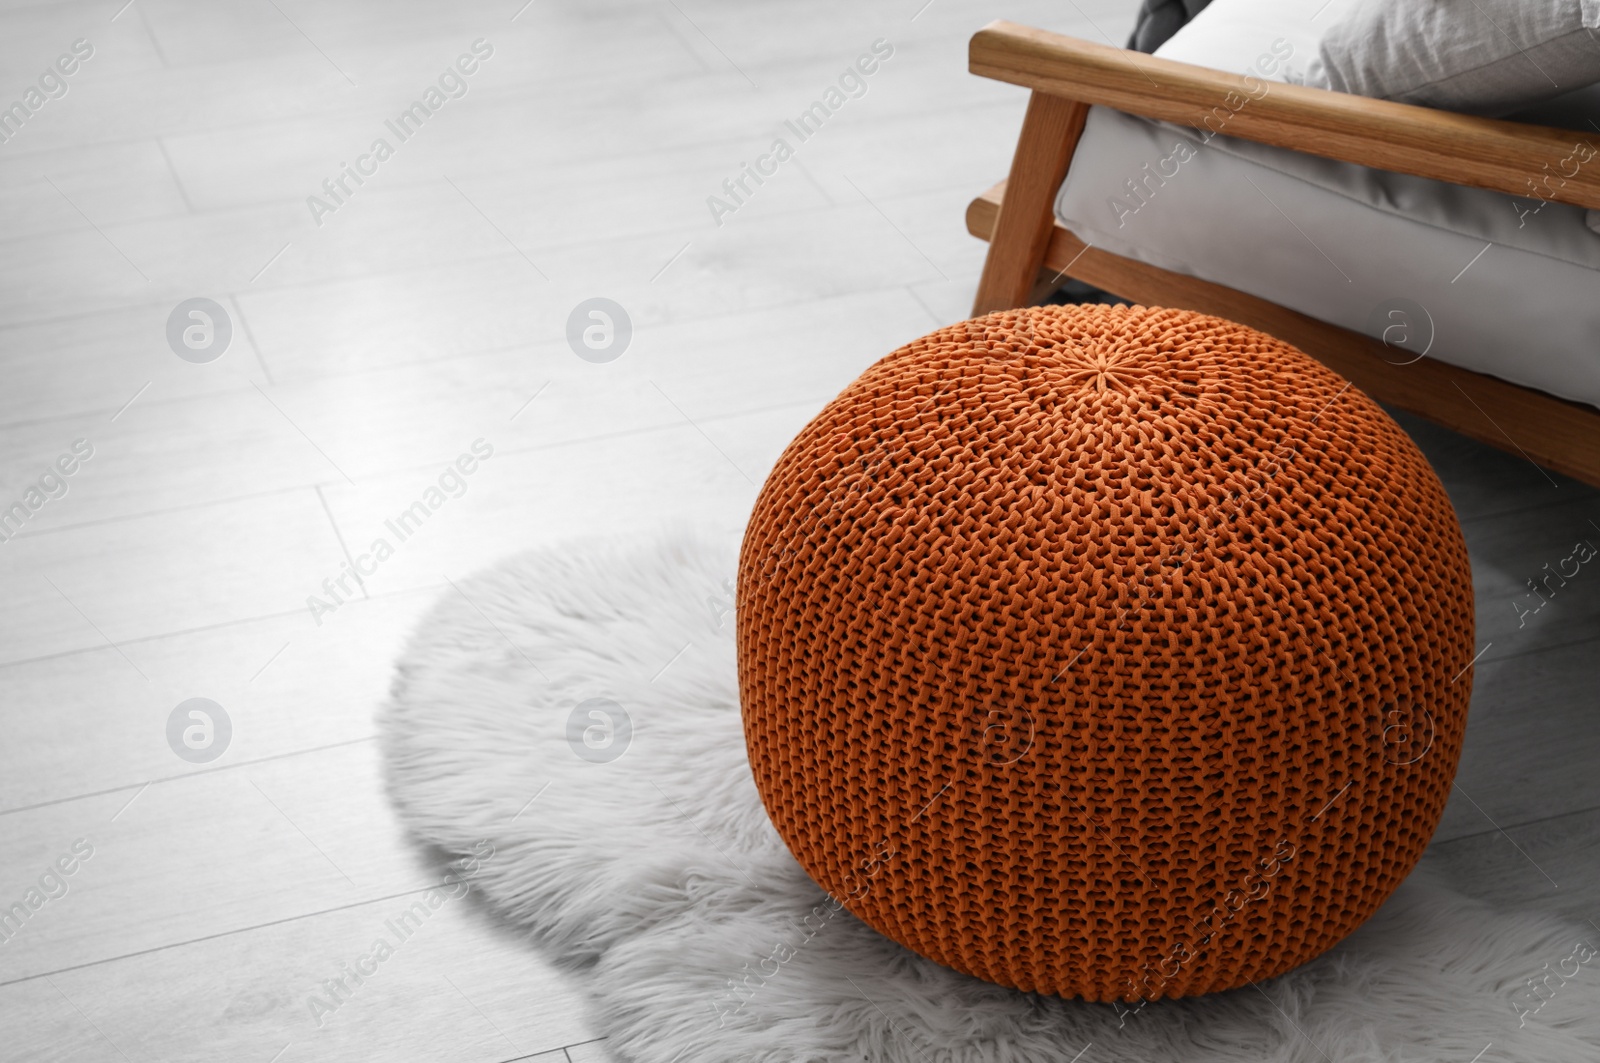 Photo of Stylish knitted pouf on floor in room. Interior design